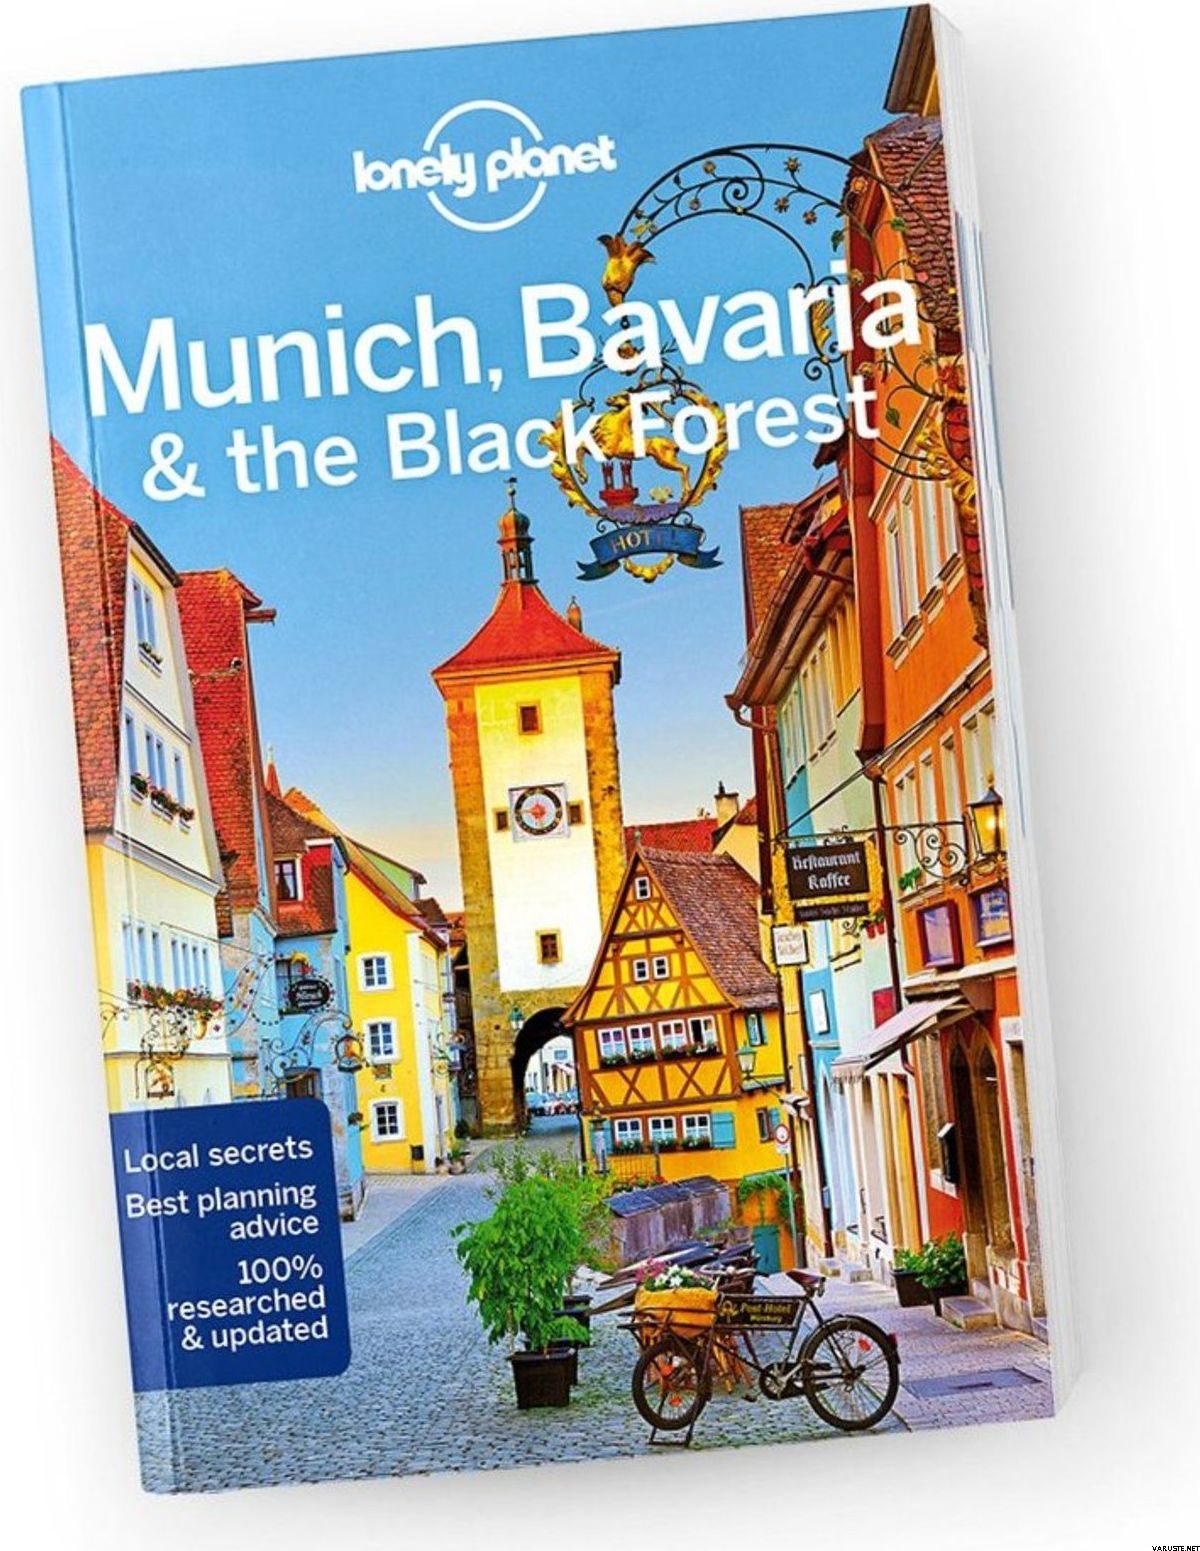 Lonely Planet Munich, Bavaria  the Black Forest | Travel Guides Europe |  Varuste.net English